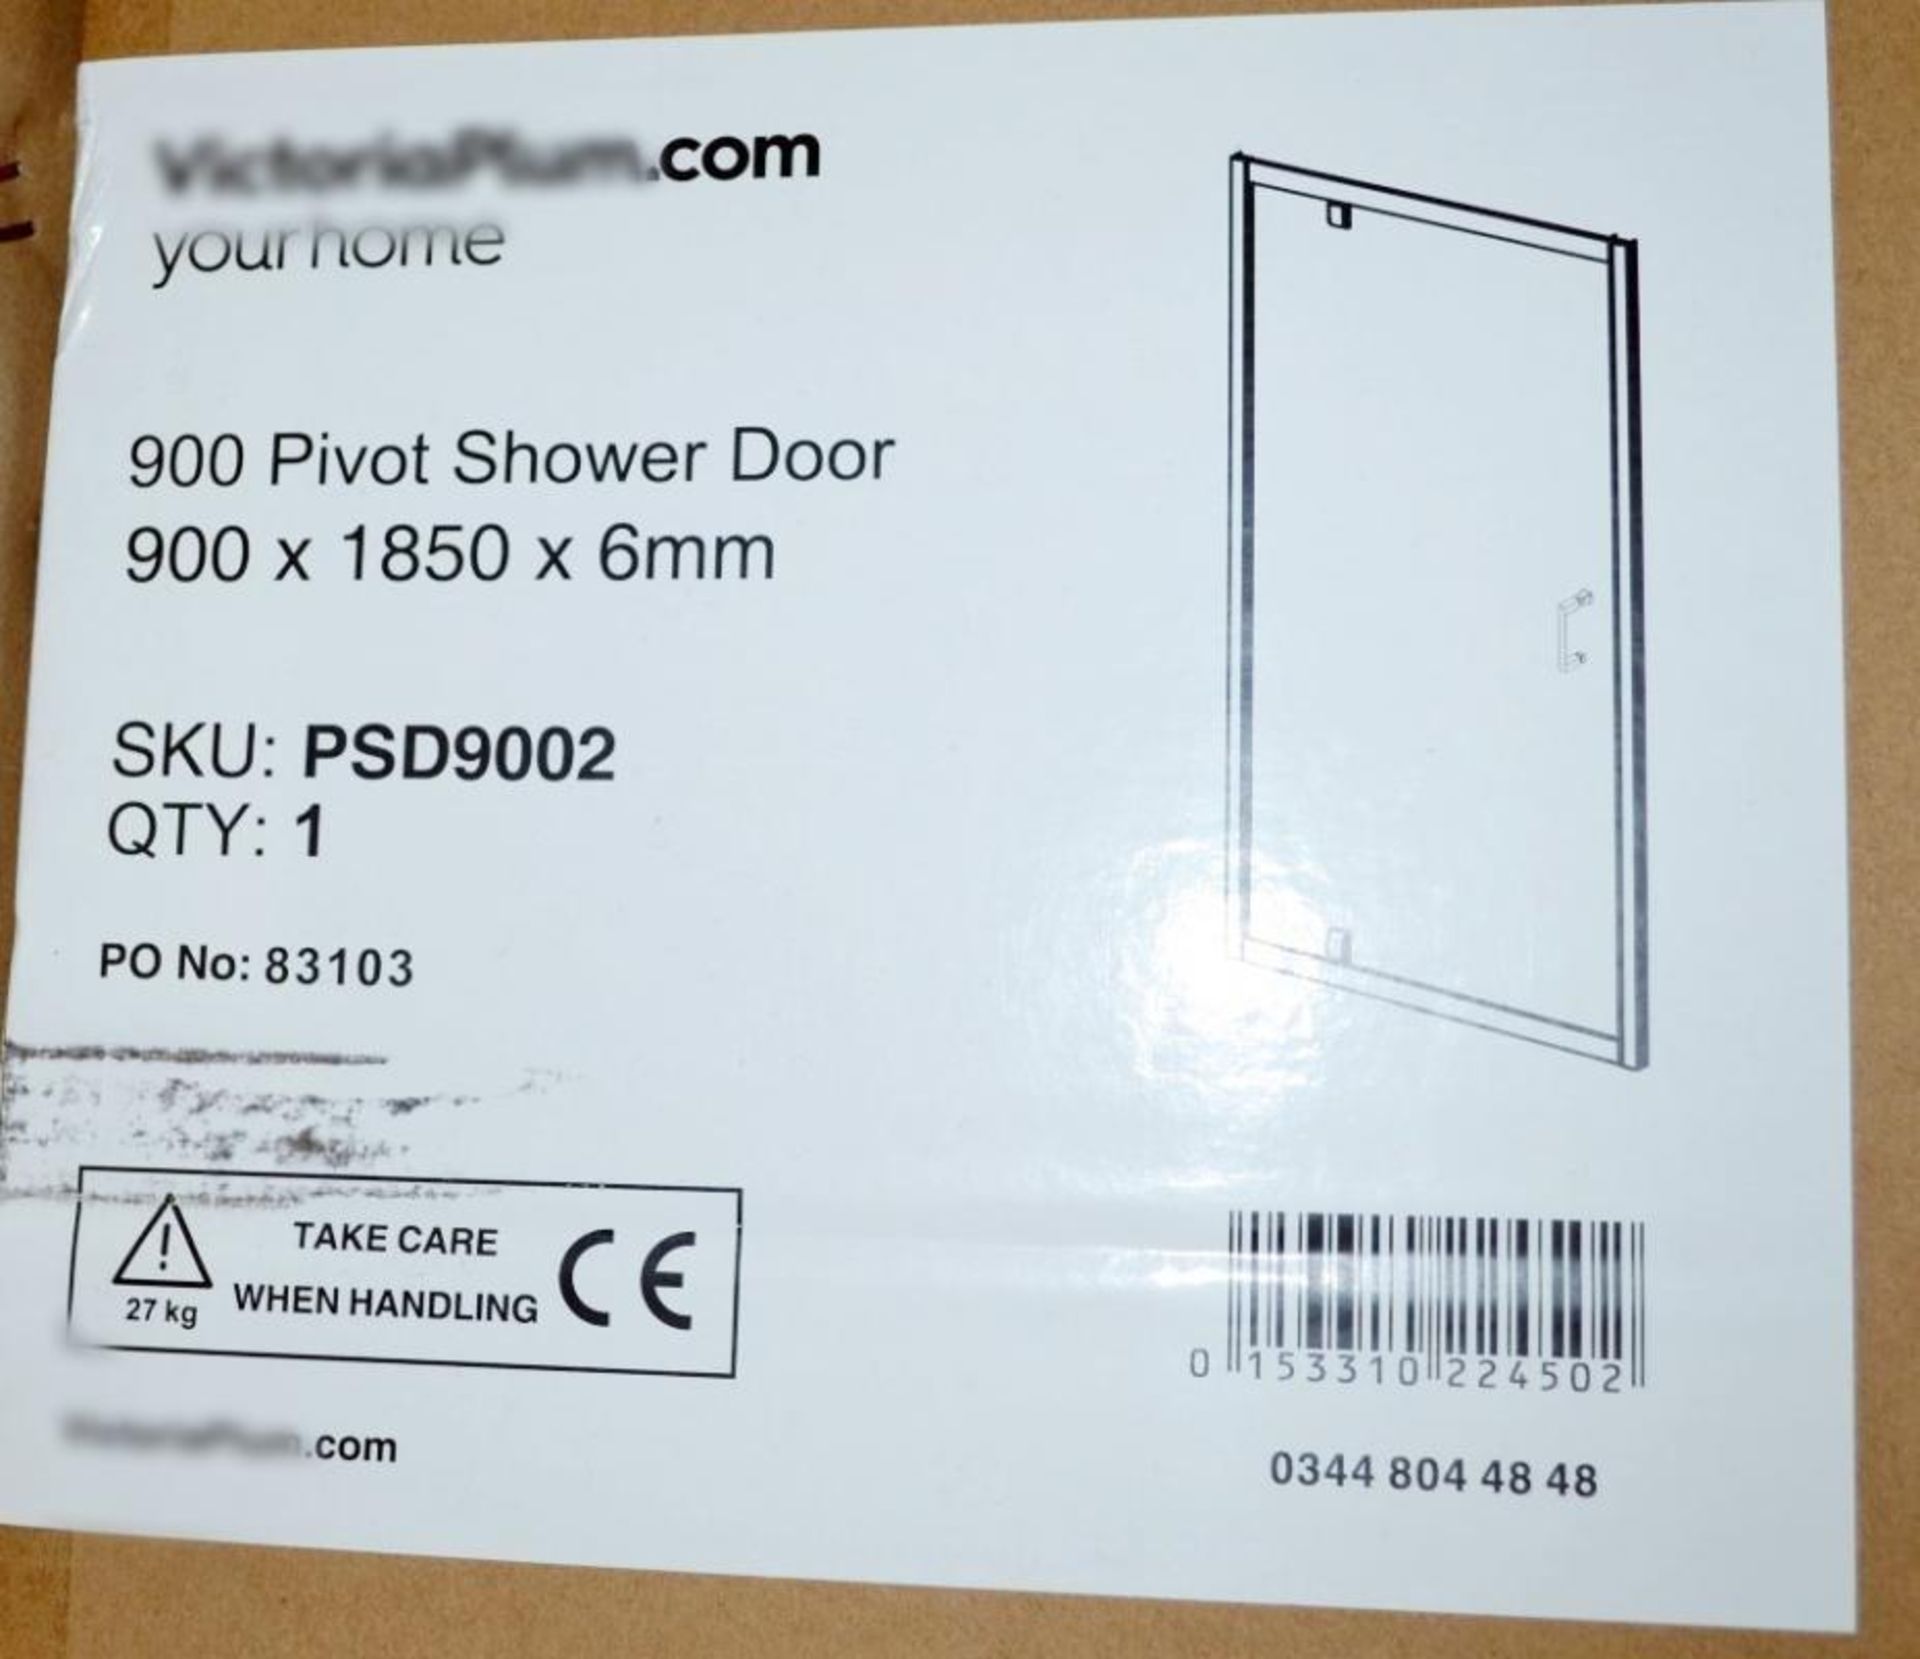 1 x 900 Pivot Shower Door (PSD9002) - Unused Boxed Stock - Dimensions: 900 x 1850 x 6mm - CL269 - Re - Image 2 of 2